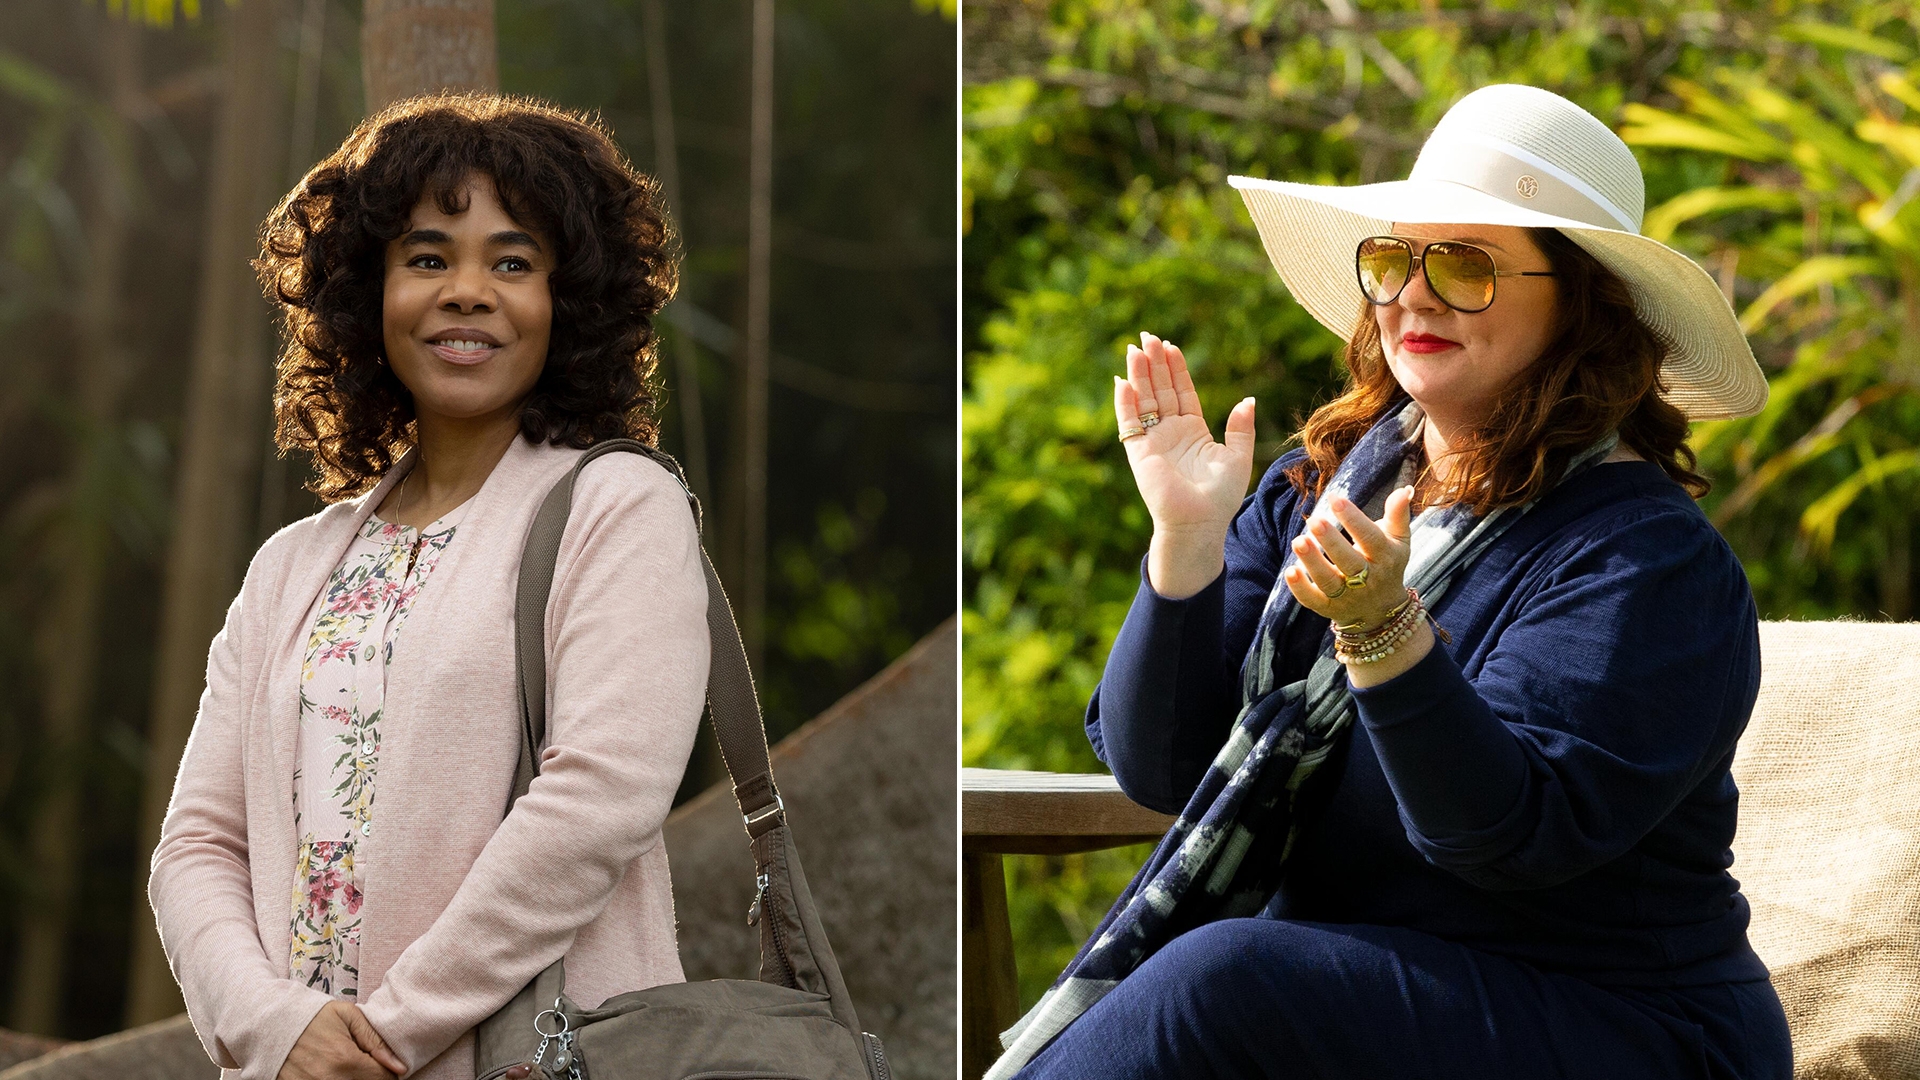 Regina Hall and Melissa McCarthy on the tiny husbands and big reveals of the latest Nine Perfect Strangers